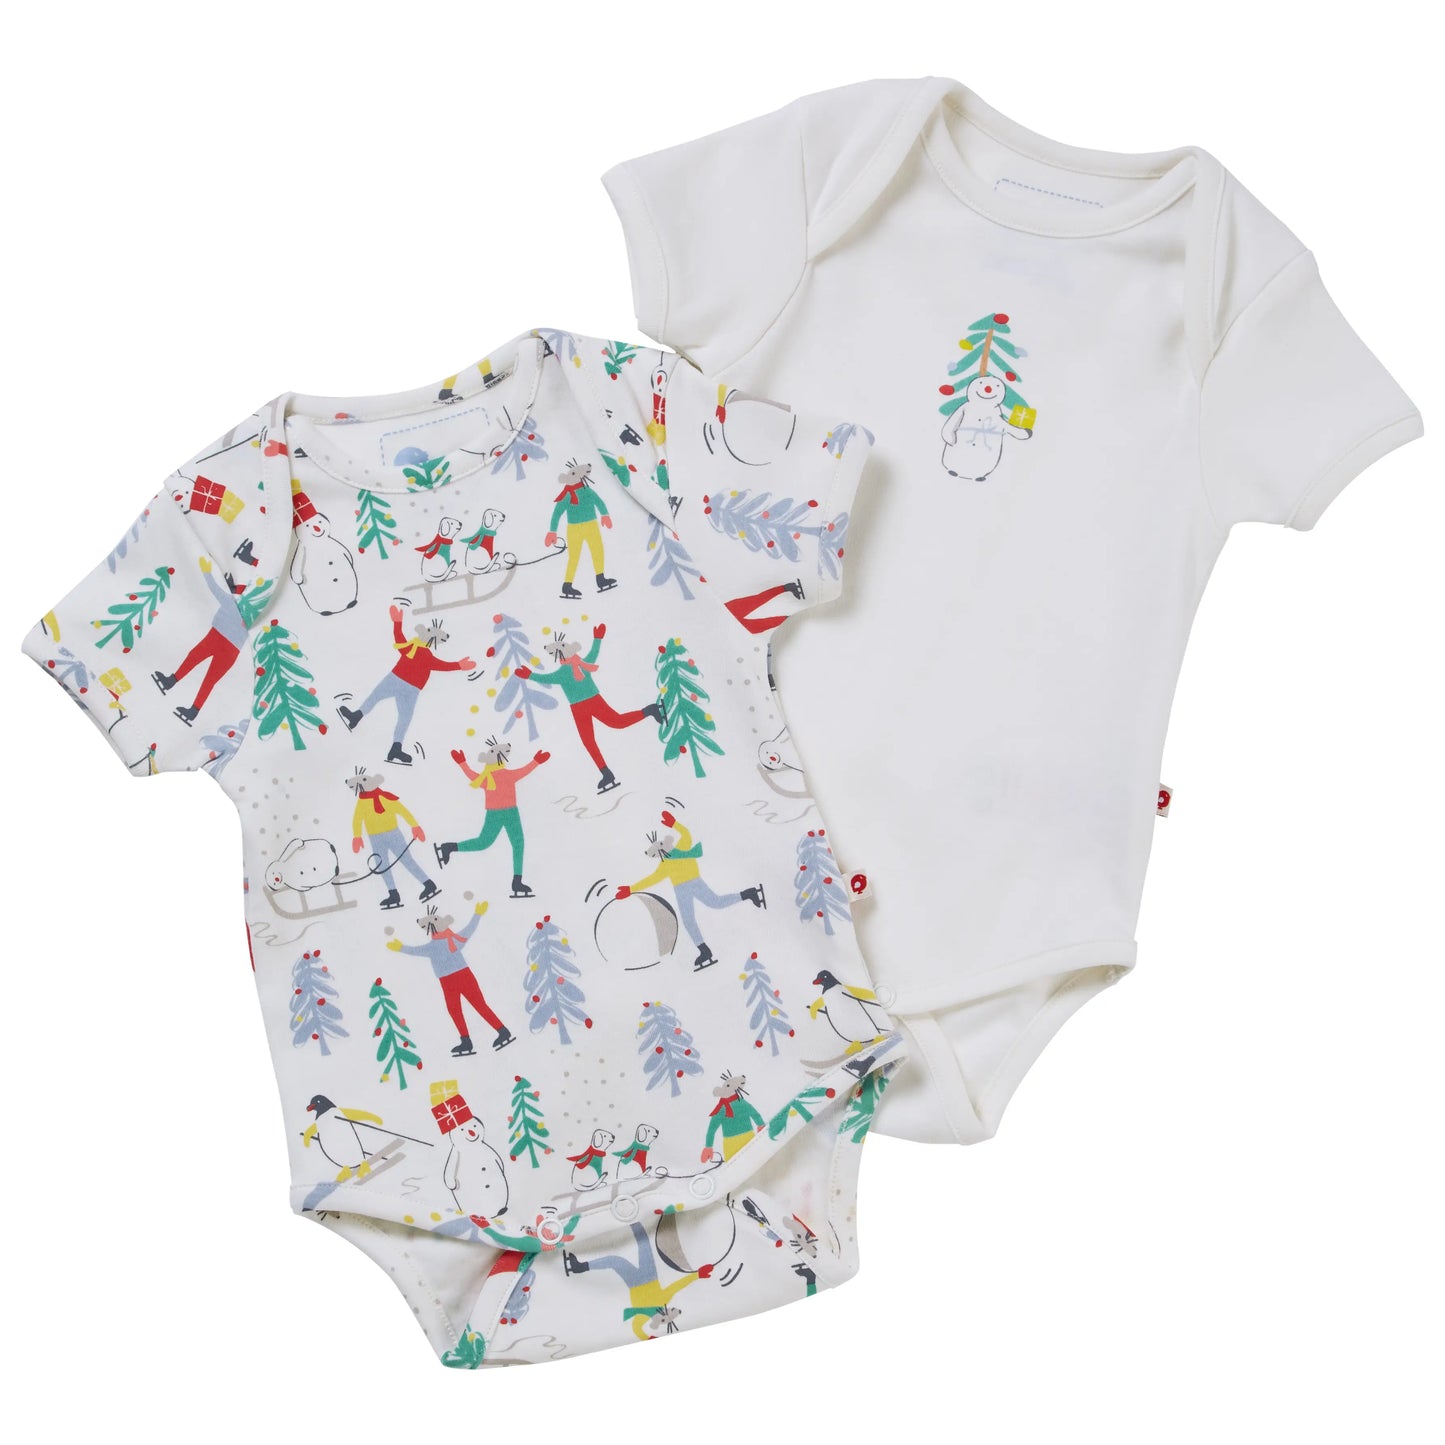 2 Pack Bodysuits - Baby's First Christmas